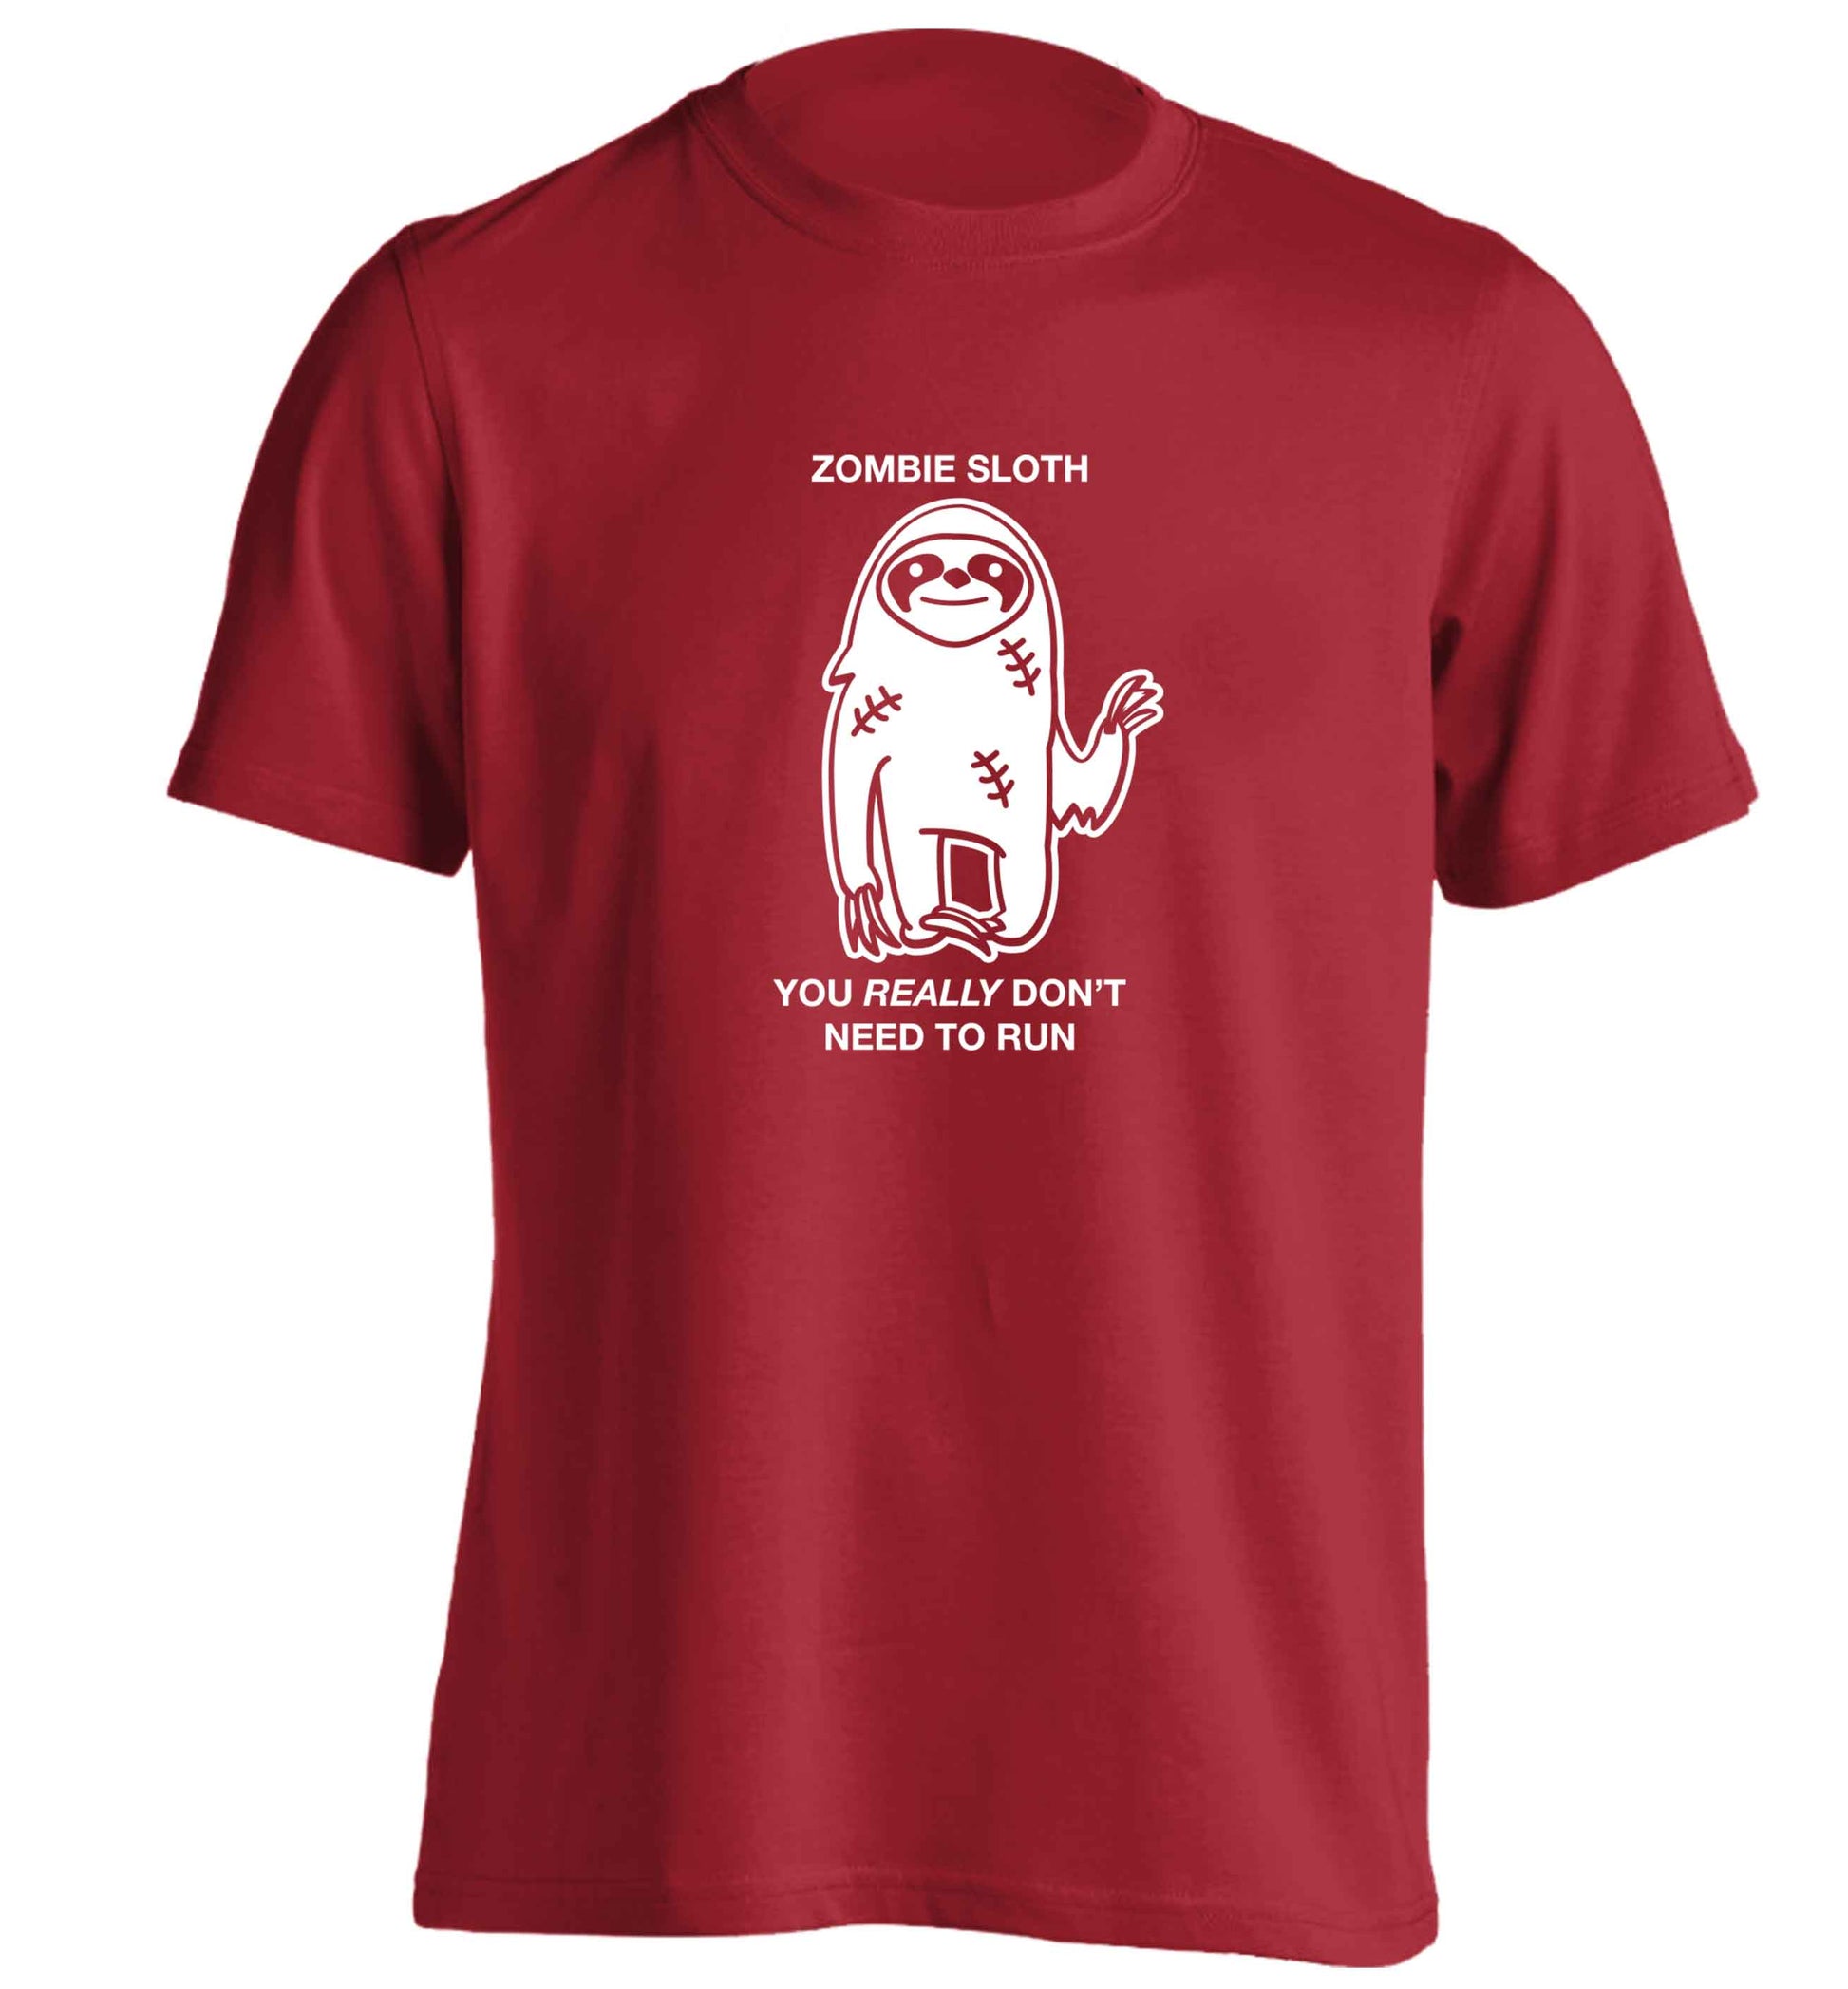 Zombie sloth you really don't need to run adults unisex red Tshirt 2XL